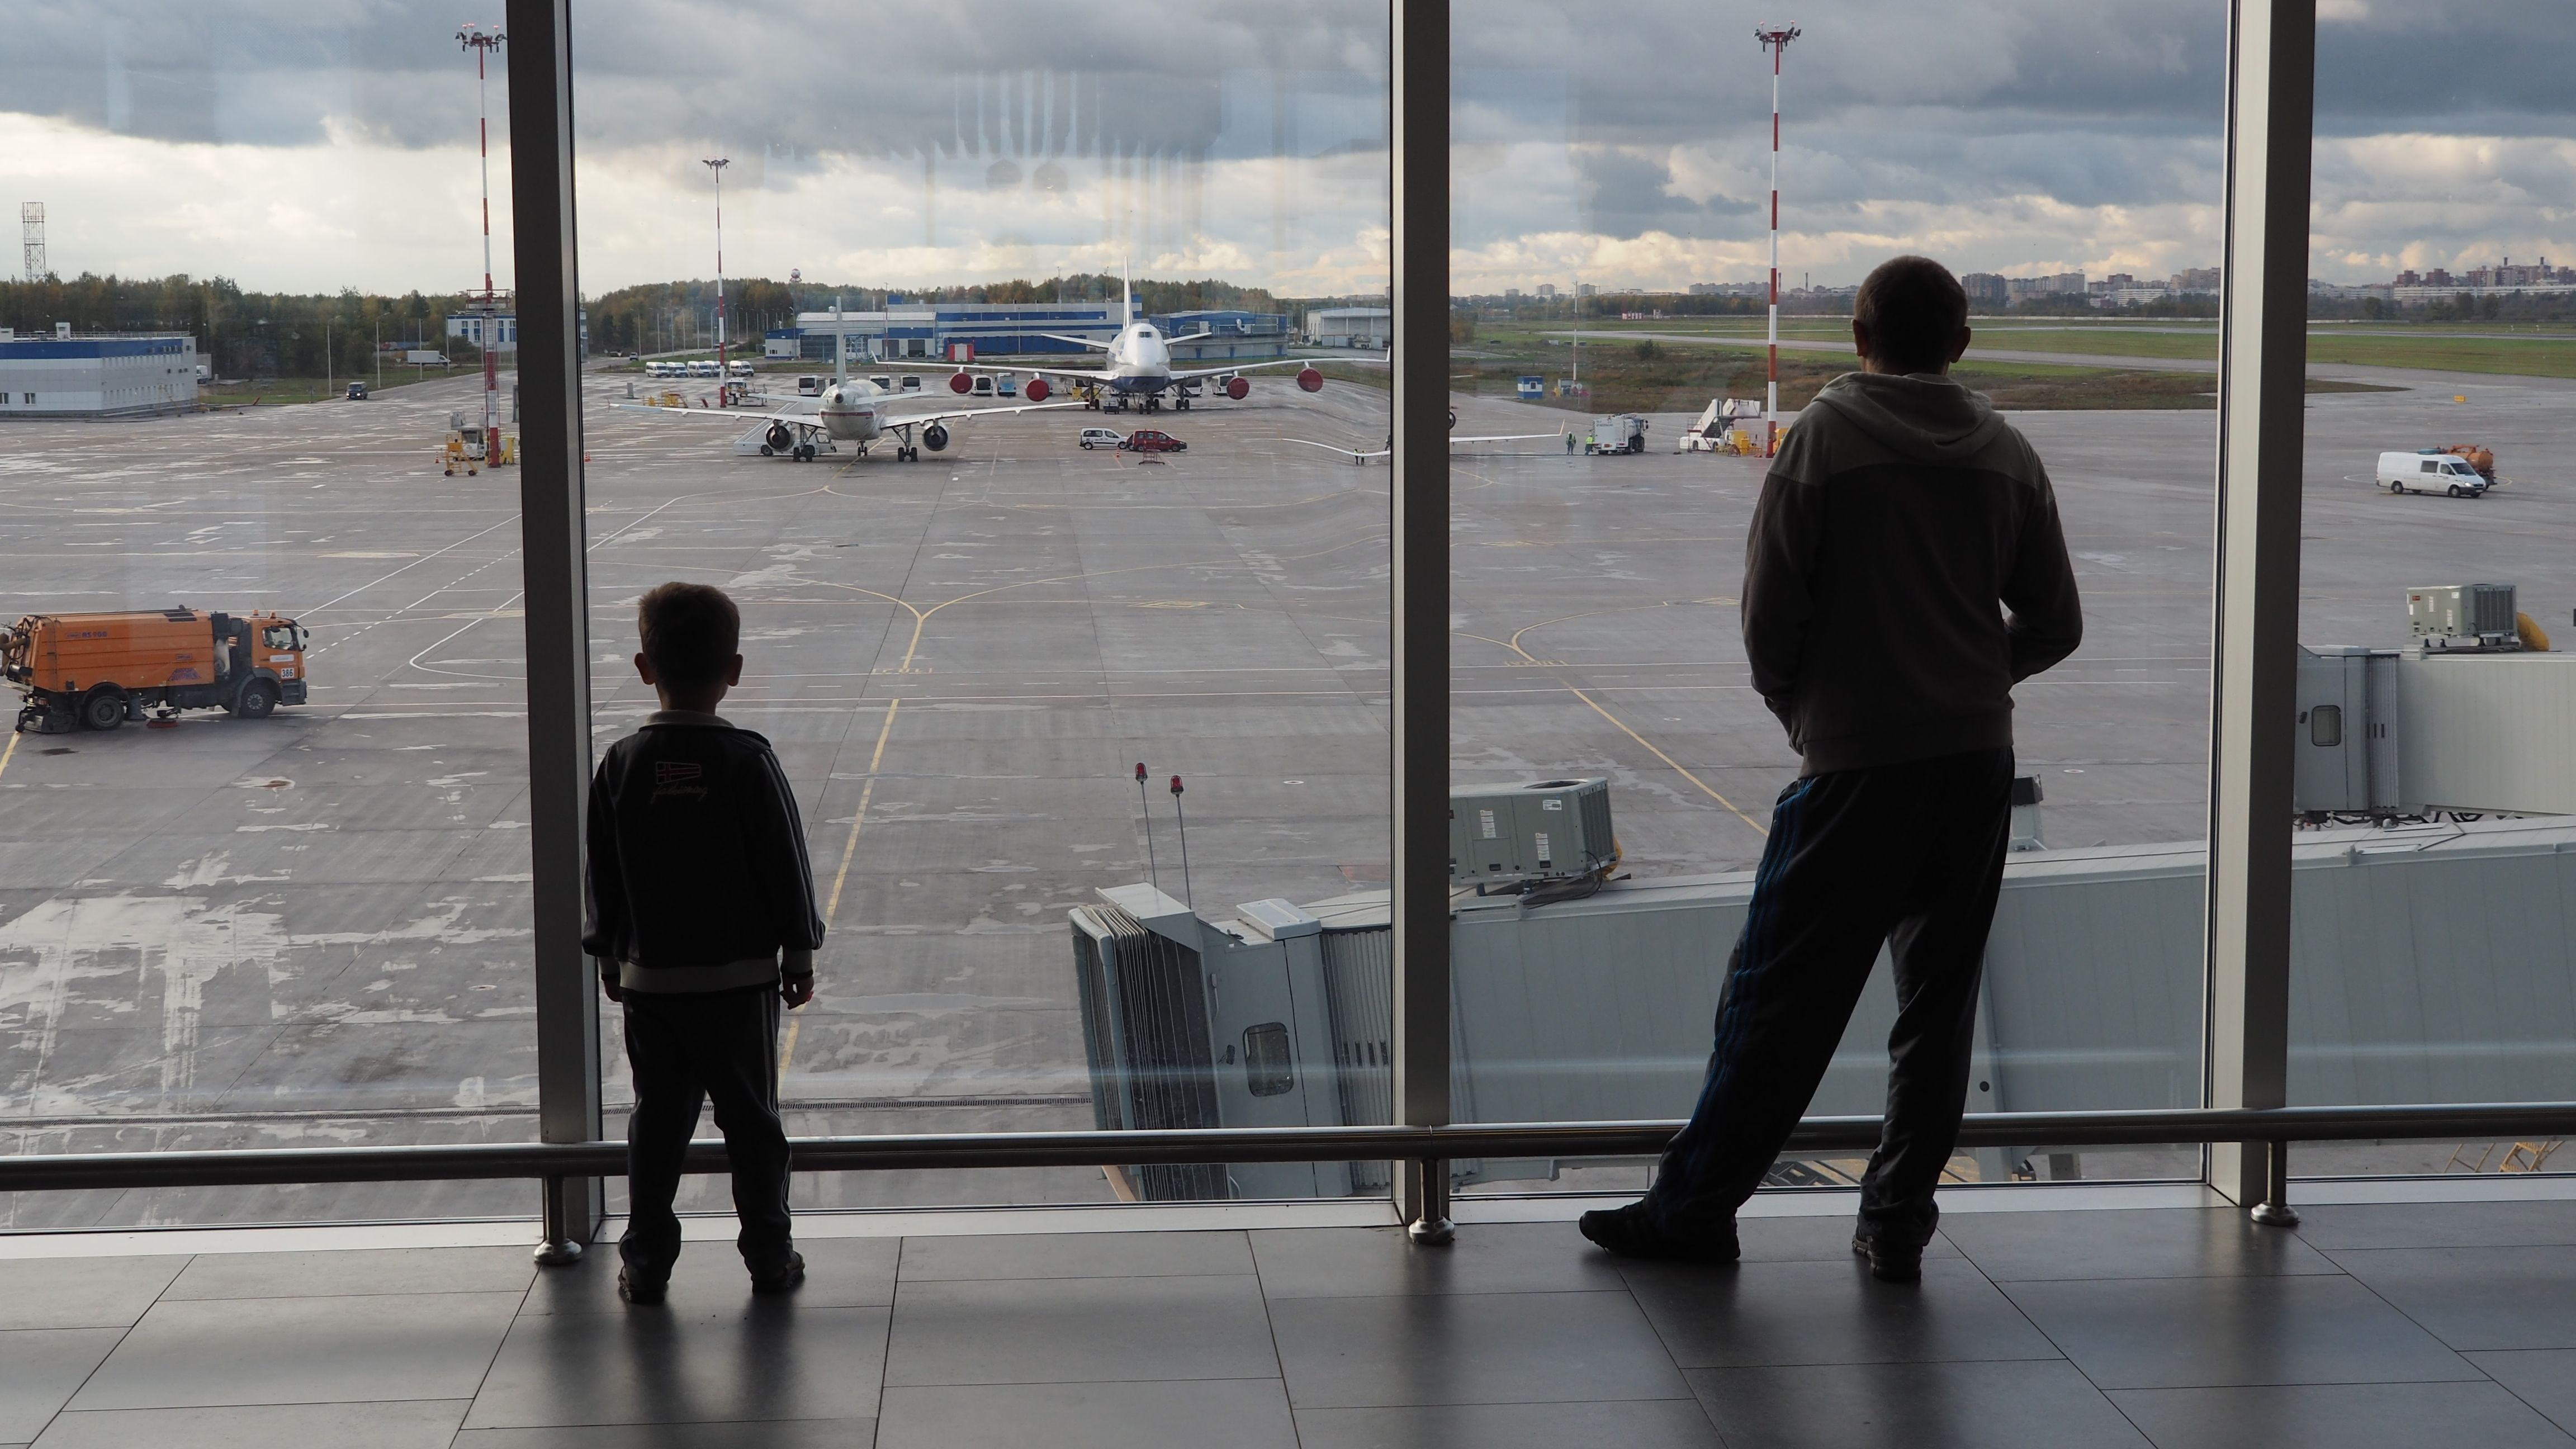 A Passenger and a child looking at some aircraft from an airport terminal window.